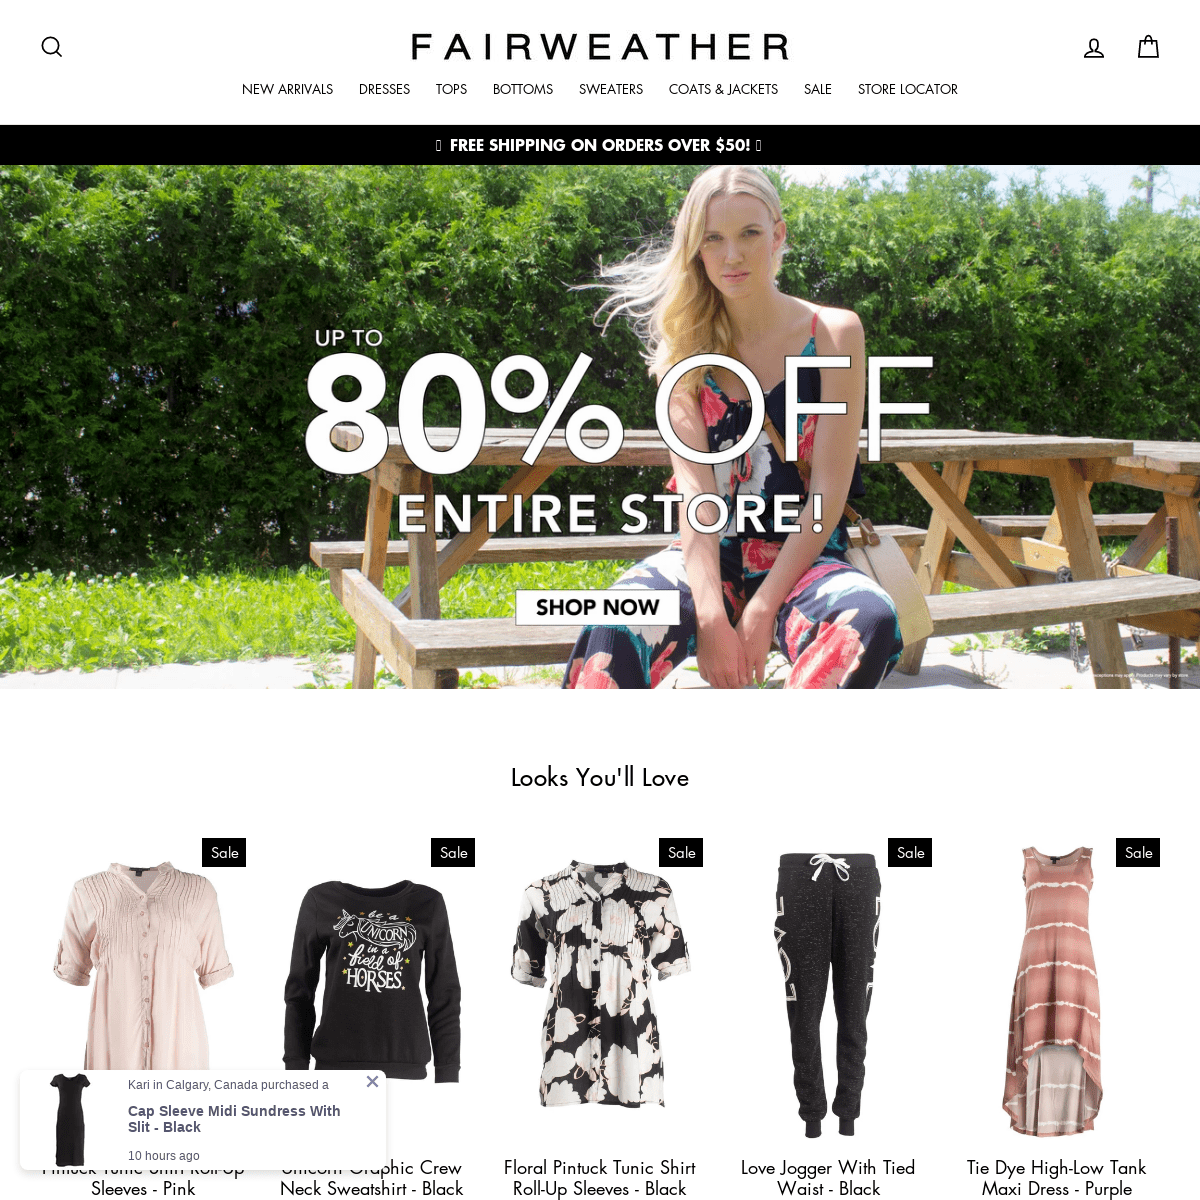 A complete backup of fairweatherclothing.com